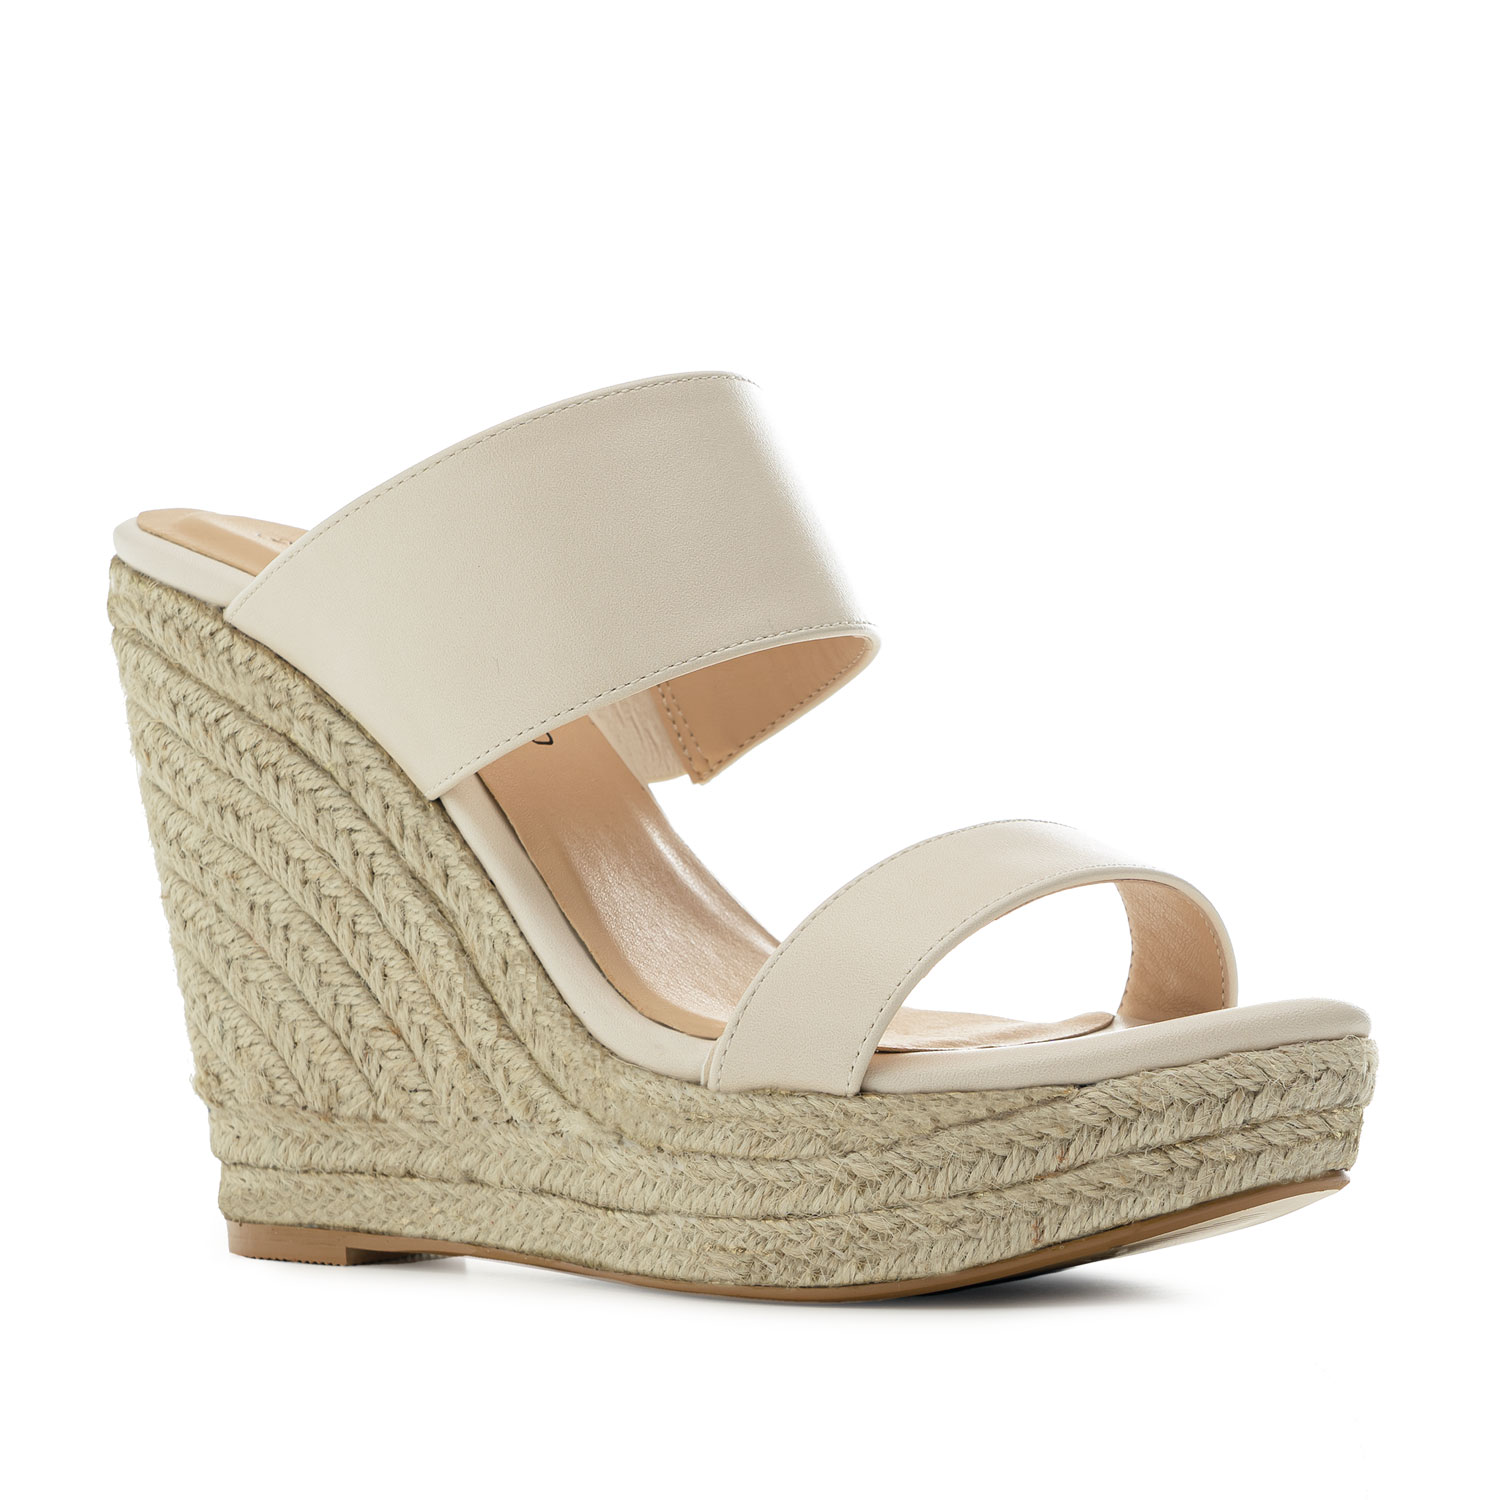 Jute Wedges in Cream-coloured faux Leather 